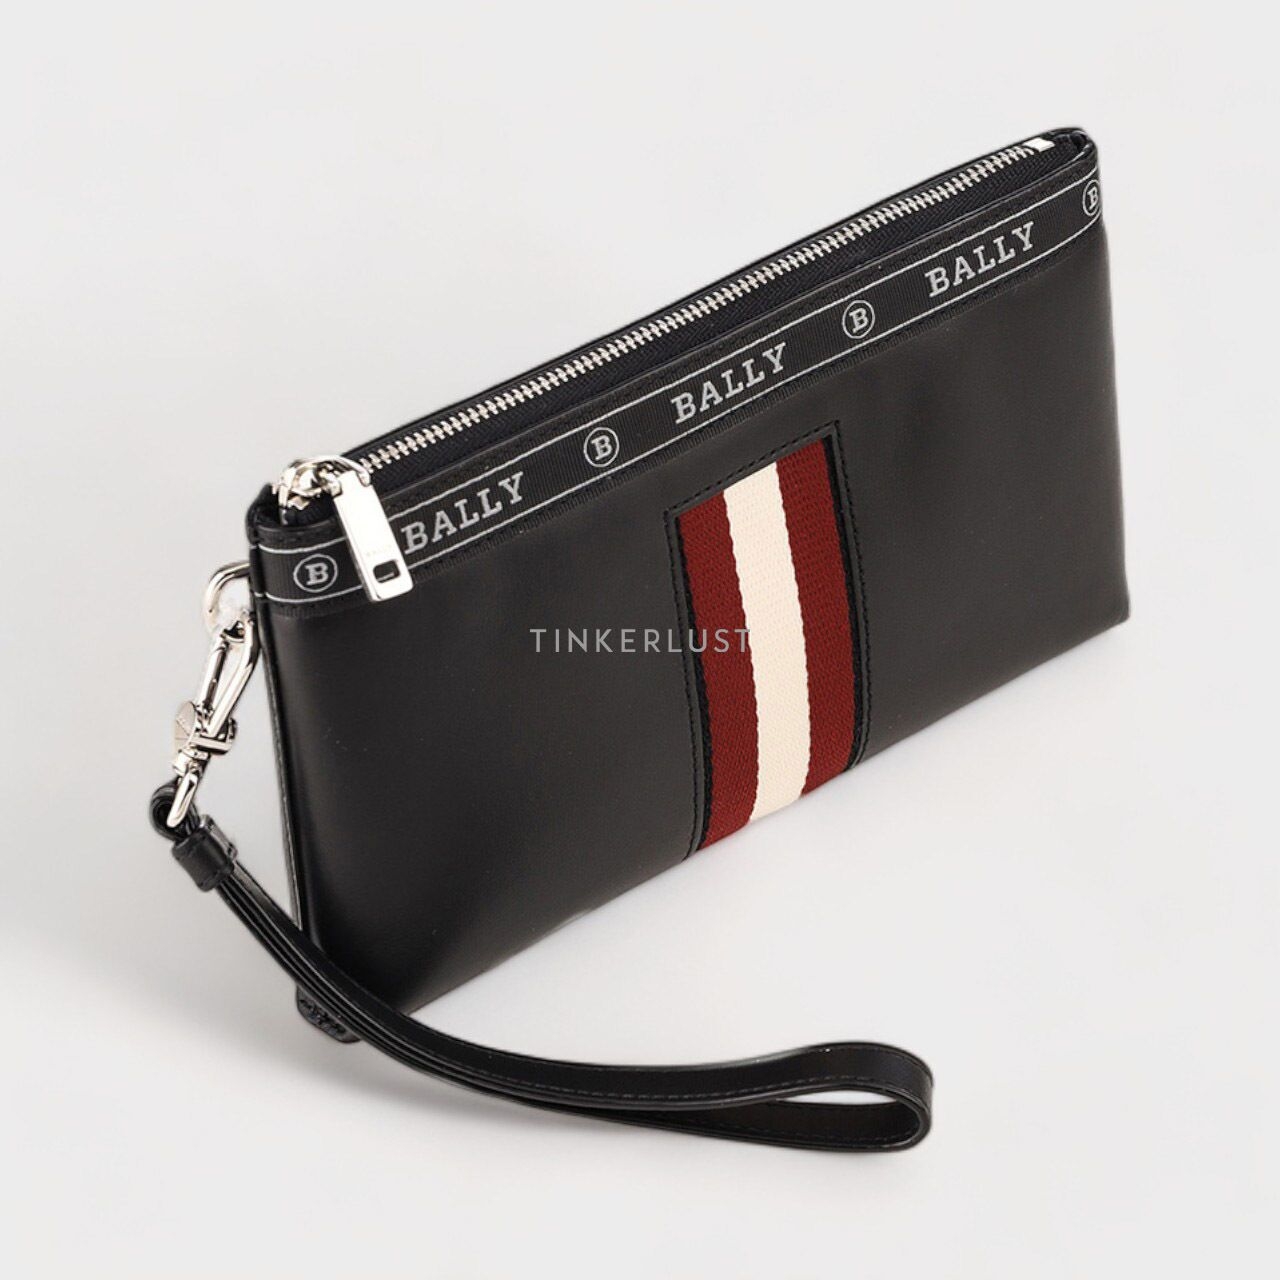 Bally Beryer Phone Wallet in Black Bovine Leather with Red/White Stripe Pouch